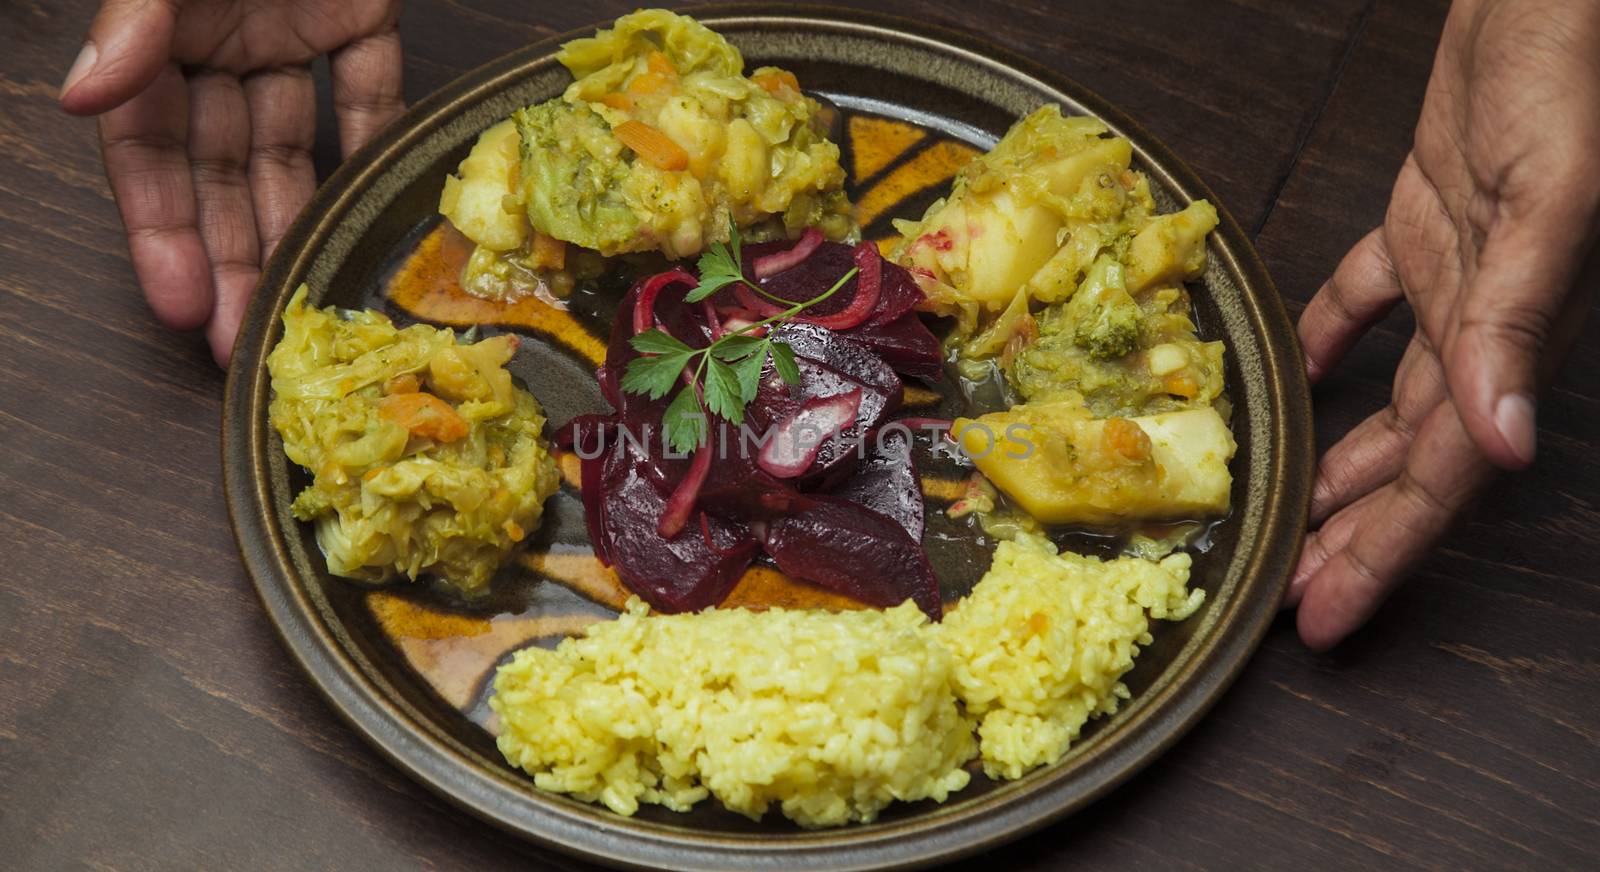 An afro-american man s hands are presenting a plate with vegetable stew and salad of red beetroot.